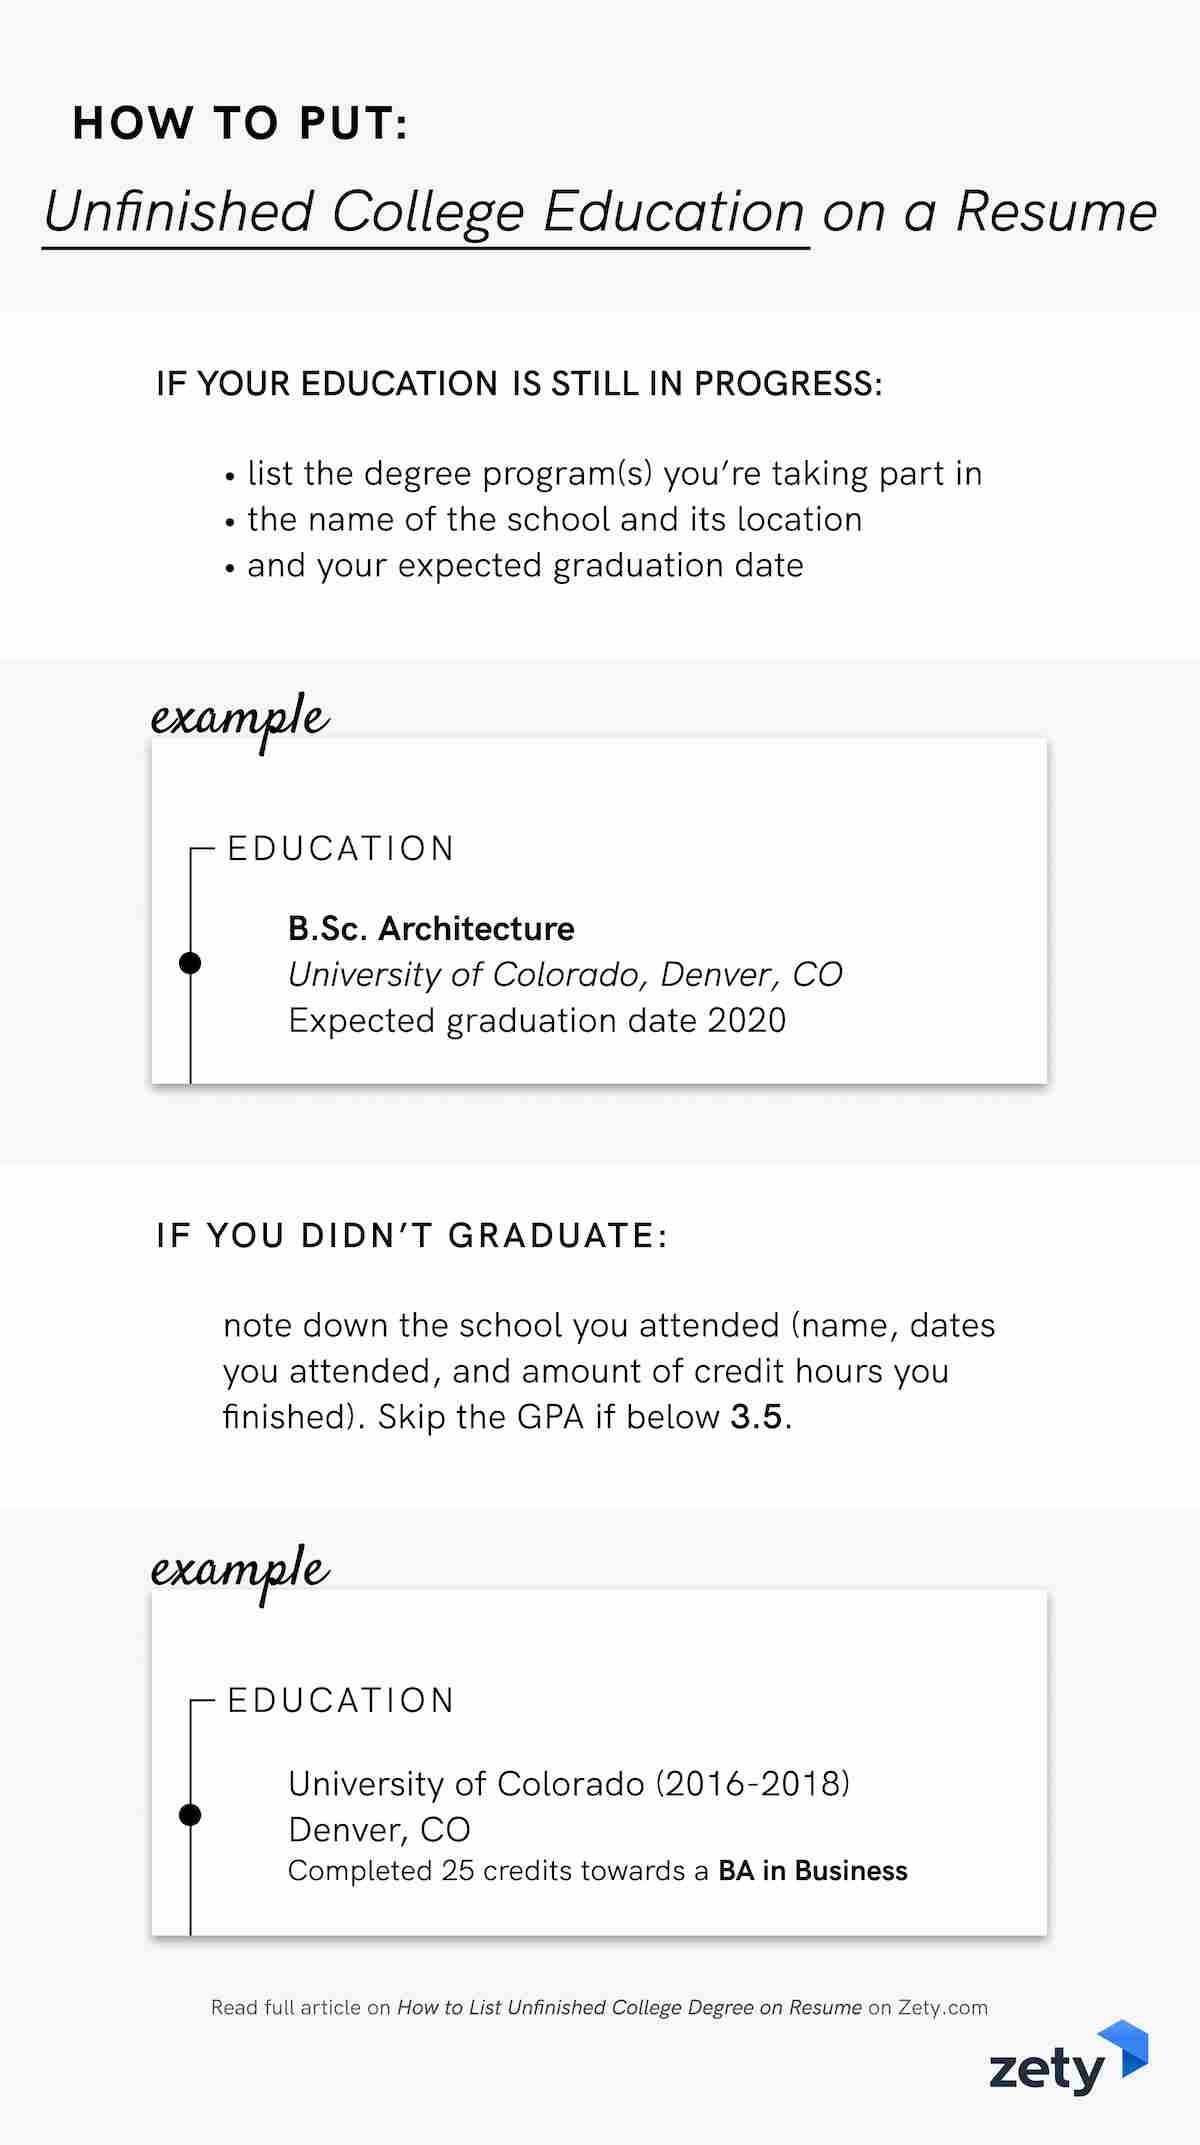 How to List Unfinished College Degree on Resume [Examples]